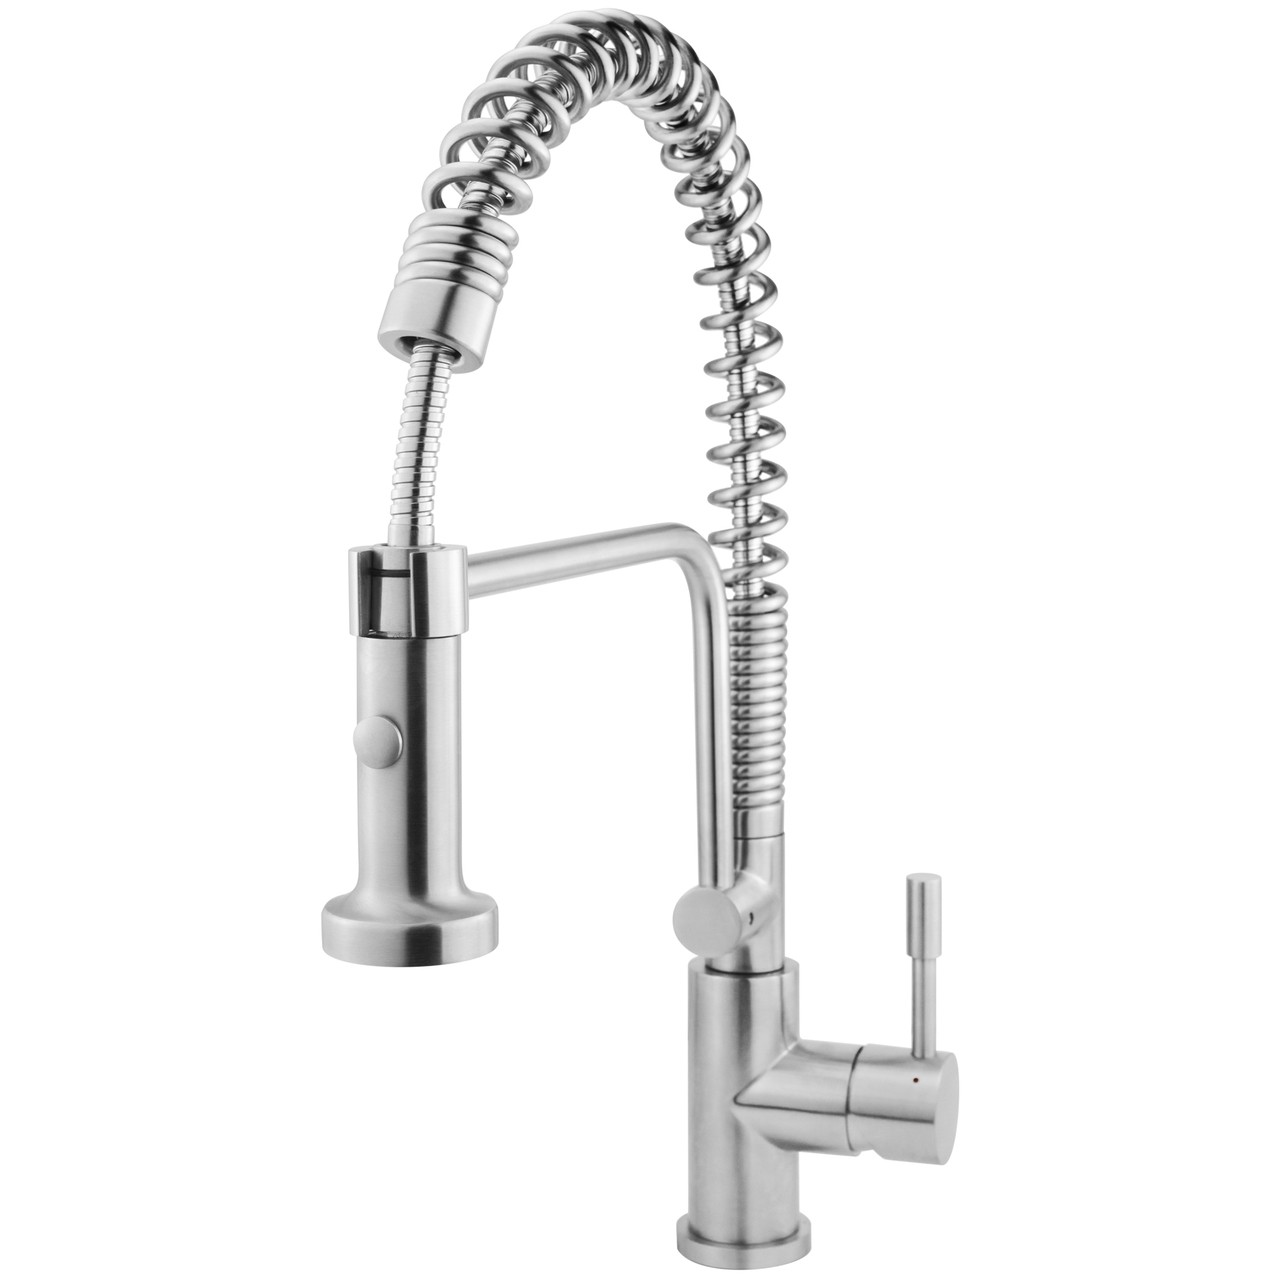 Stainless Steel Stylish Modern Pull-Down Kitchen Faucet